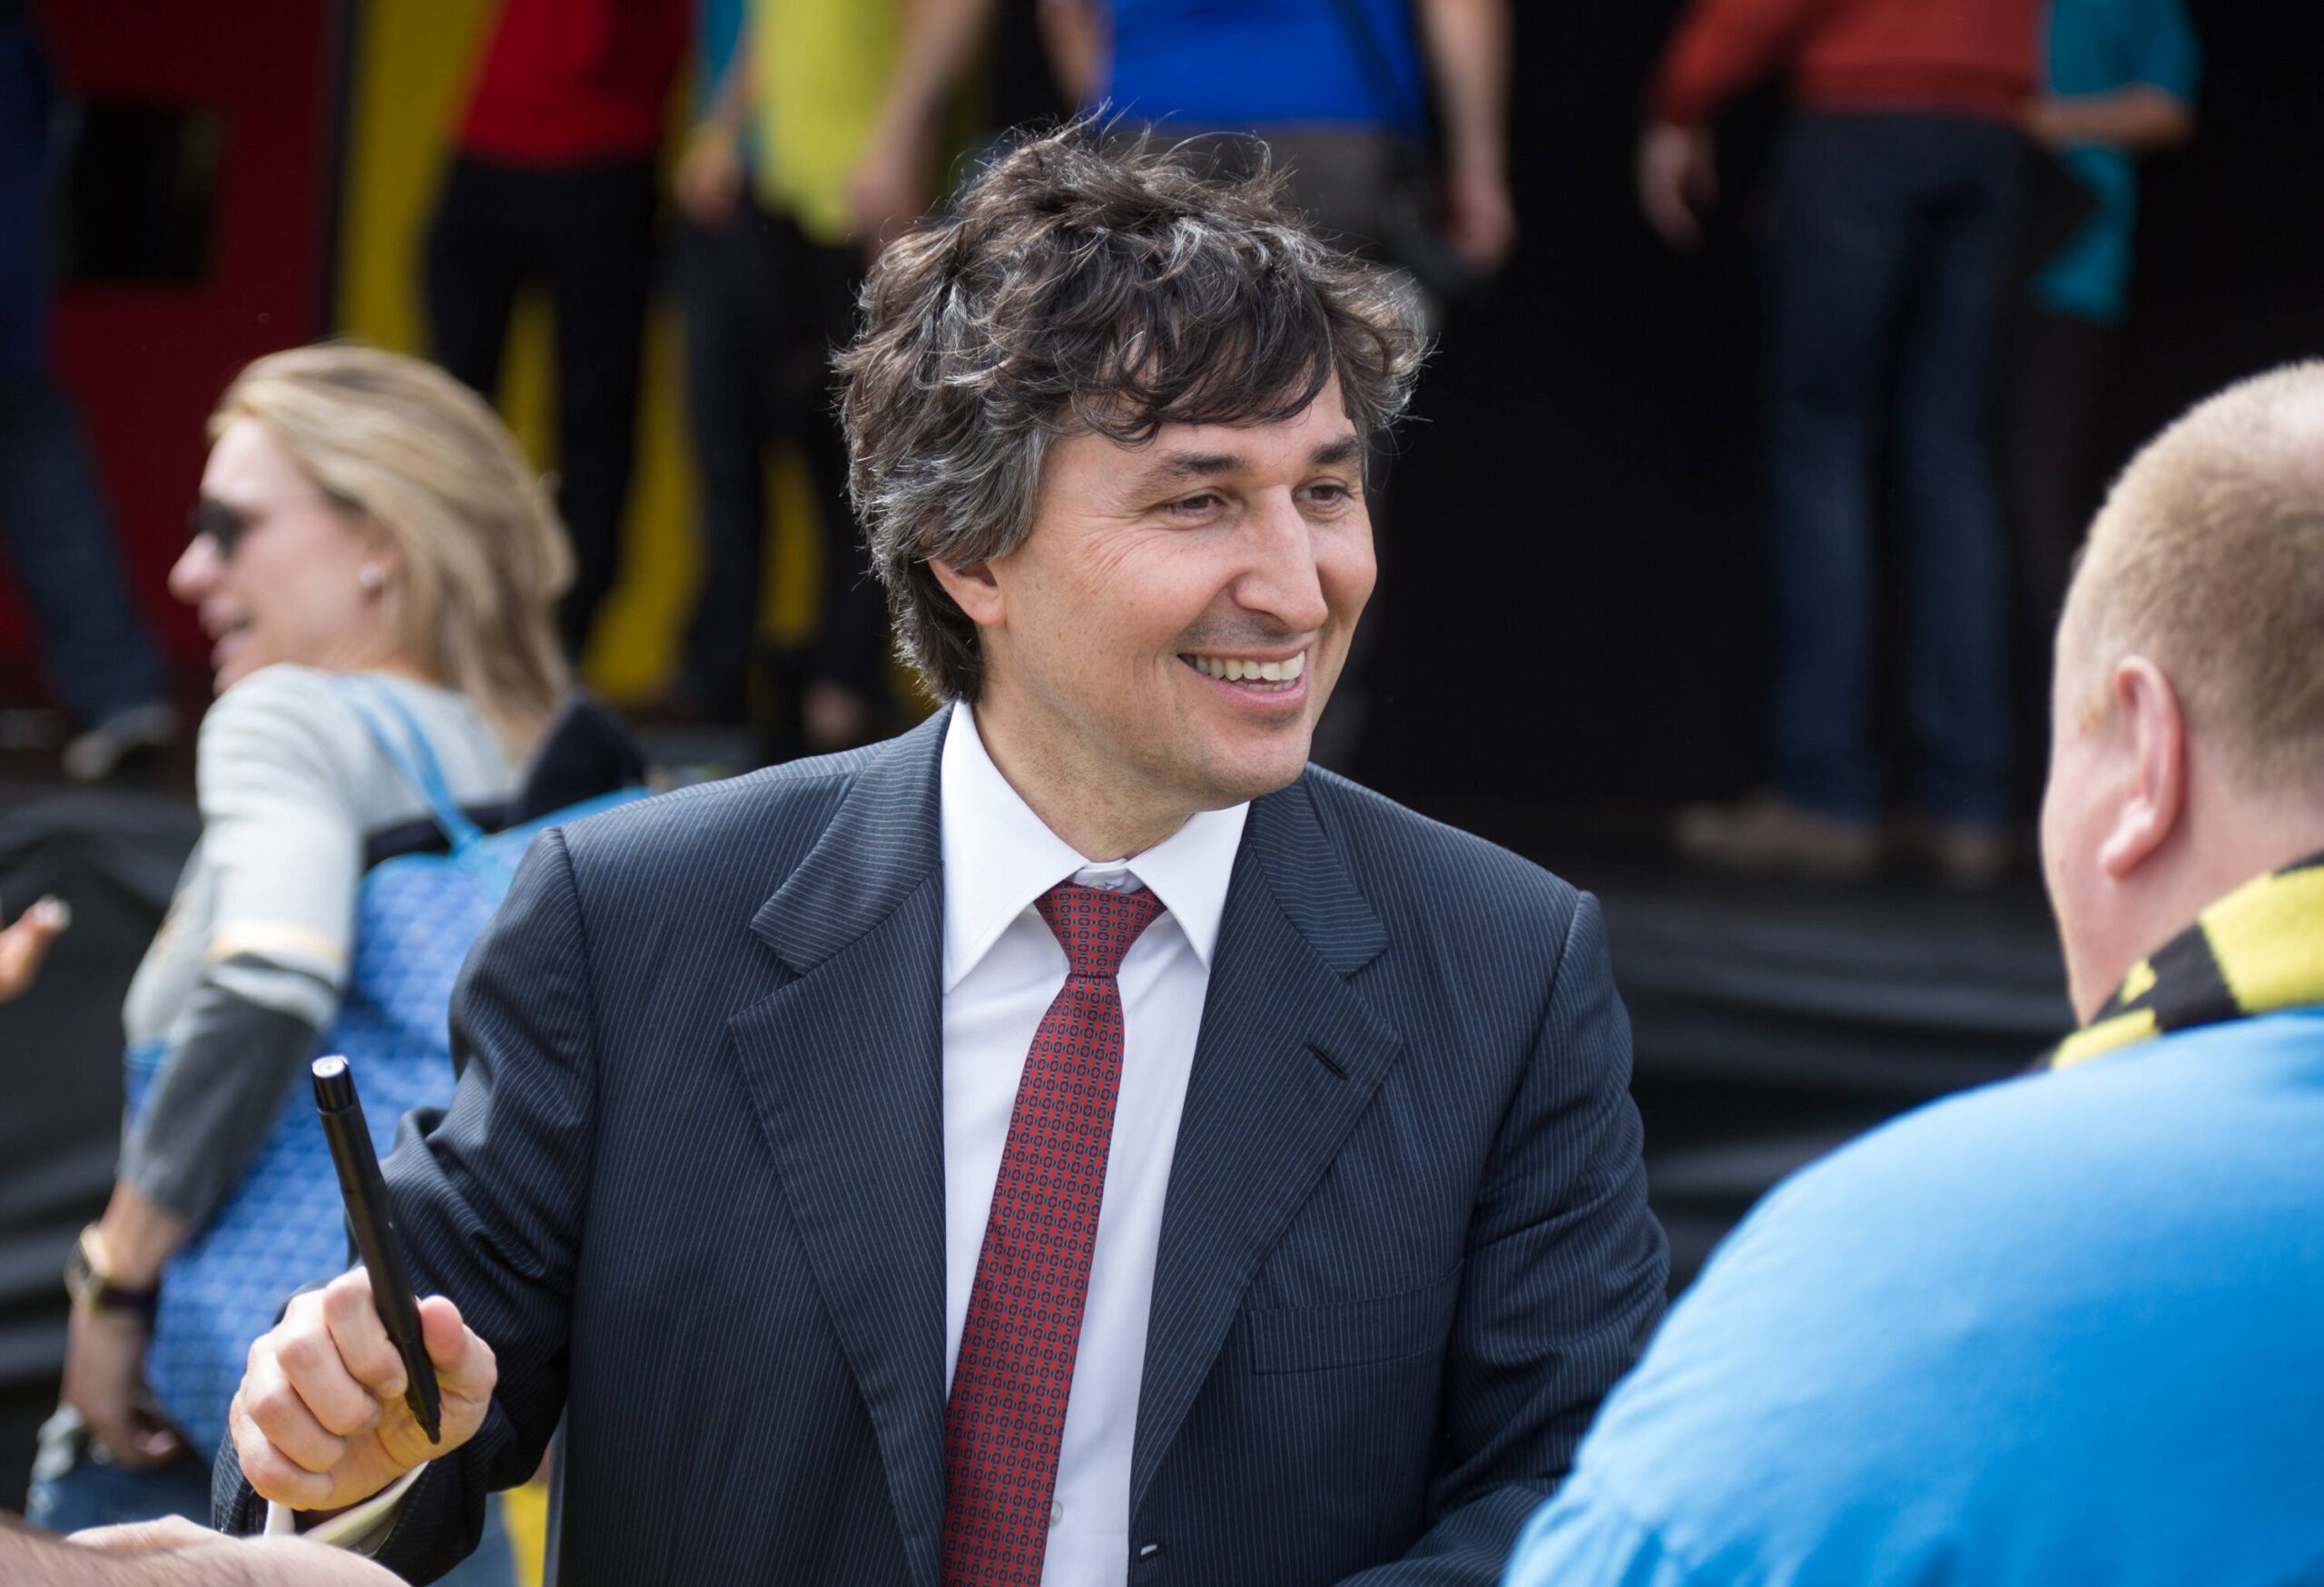 Watford Sole Owner Italian Gino Pozzo signs autographs for supporters during The Watford FC Promotion Parade at Cassiobury Park, Watford, England on 4 May 2015. PUBLICATIONxNOTxINxUK Copyright: xAndyxRowlandx 04230052

Watford Sole Owner Italian Gino Pozzo Signs autographs for Supporters during The Watford FC Promotion Parade AT  Park Watford England ON 4 May 2015 PUBLICATIONxNOTxINxUK Copyright